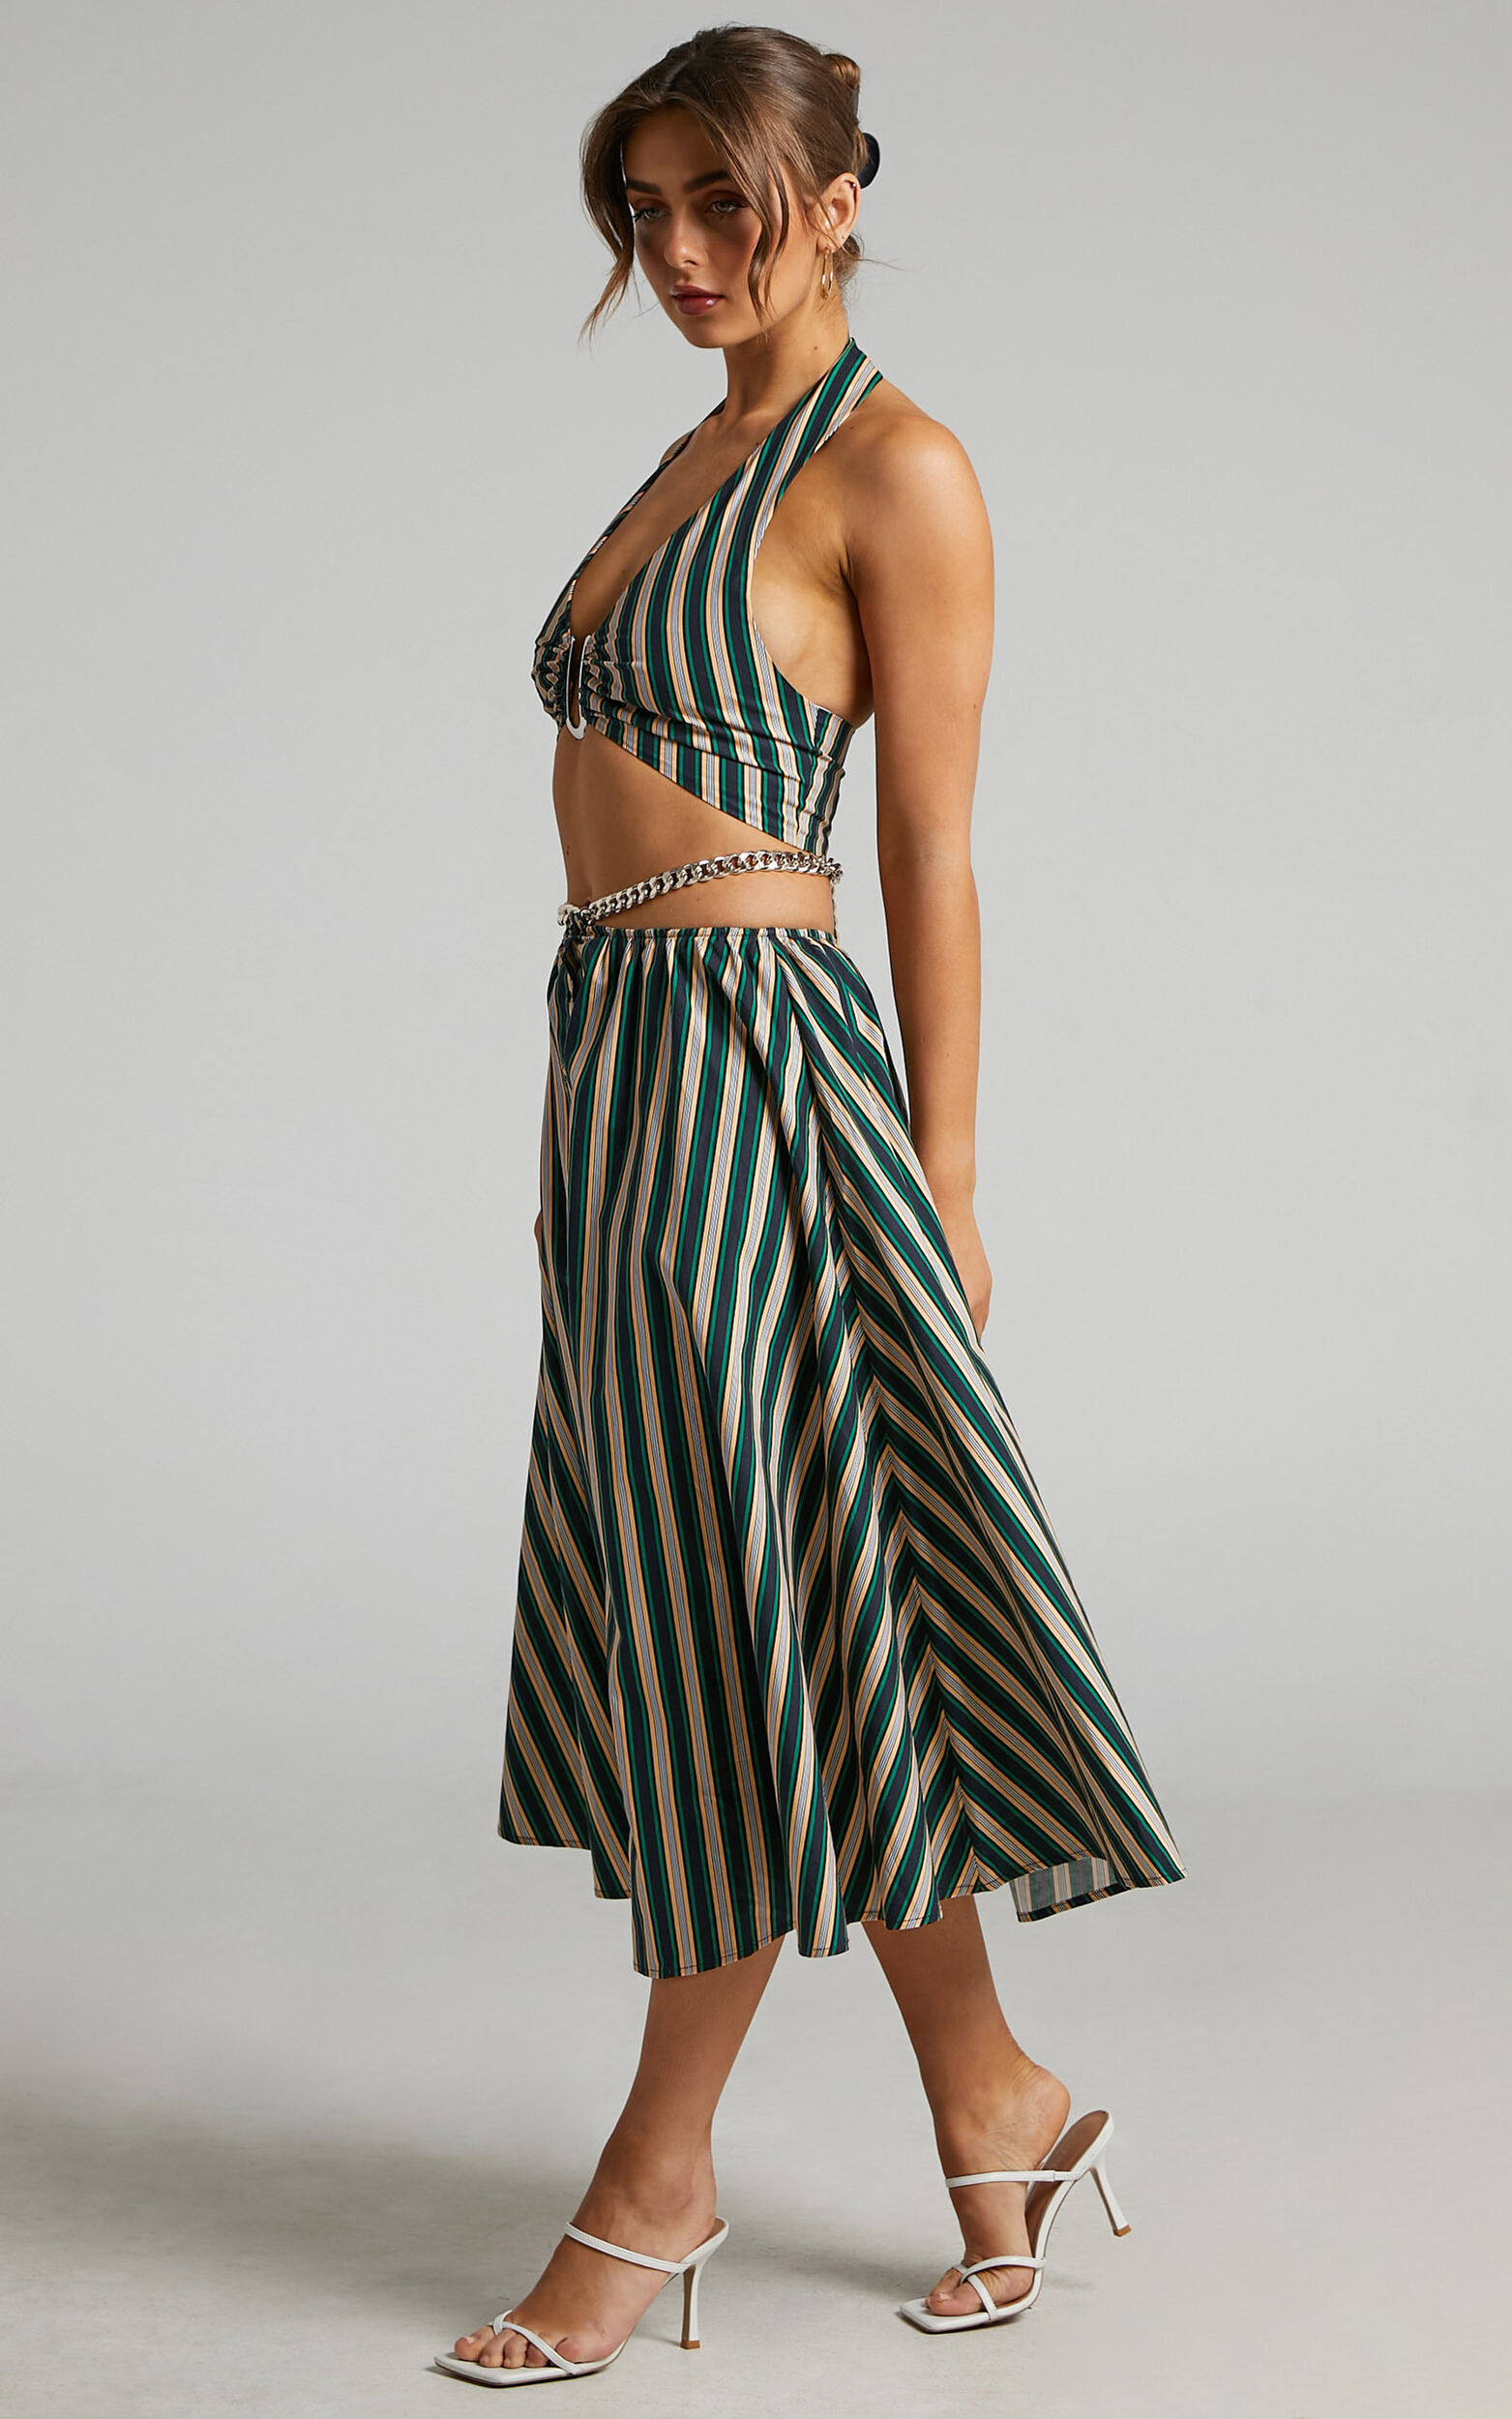 ATOIR - THE GRAVITY SKIRT in IVY PEACH STRIPE - 06, GRN1, super-hi-res image number null